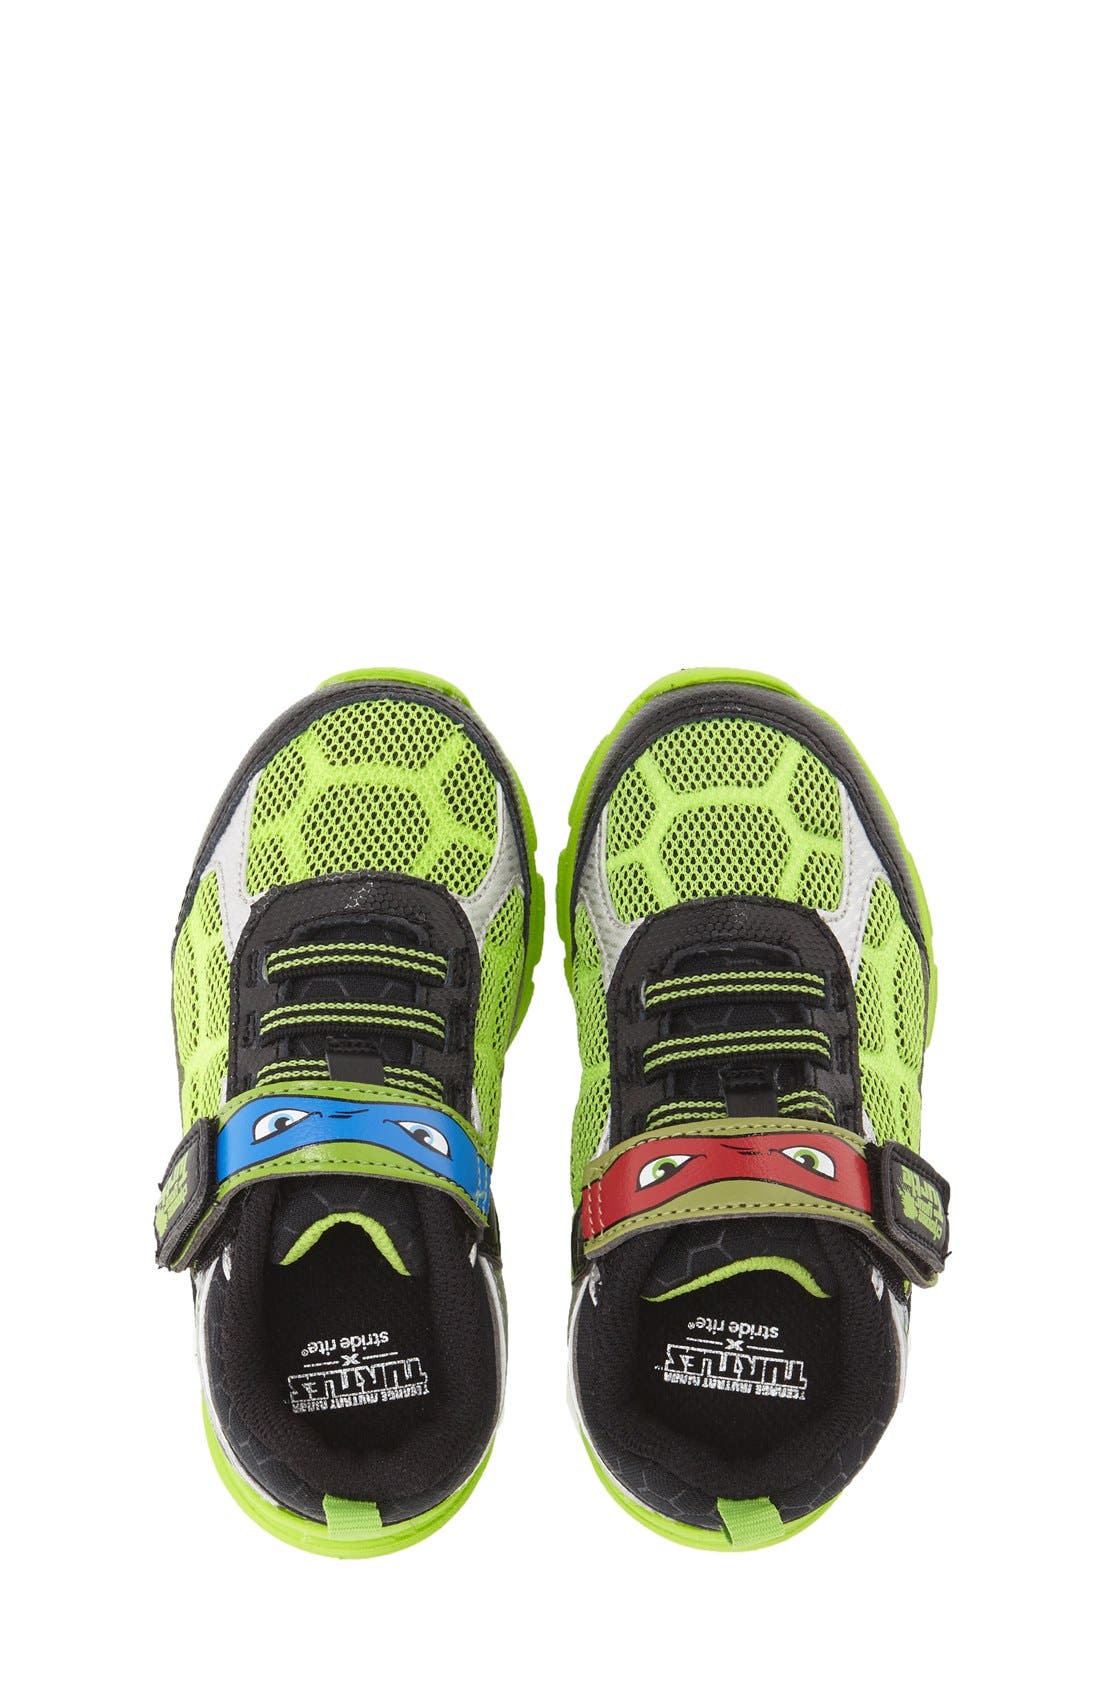 tmnt light up shoes